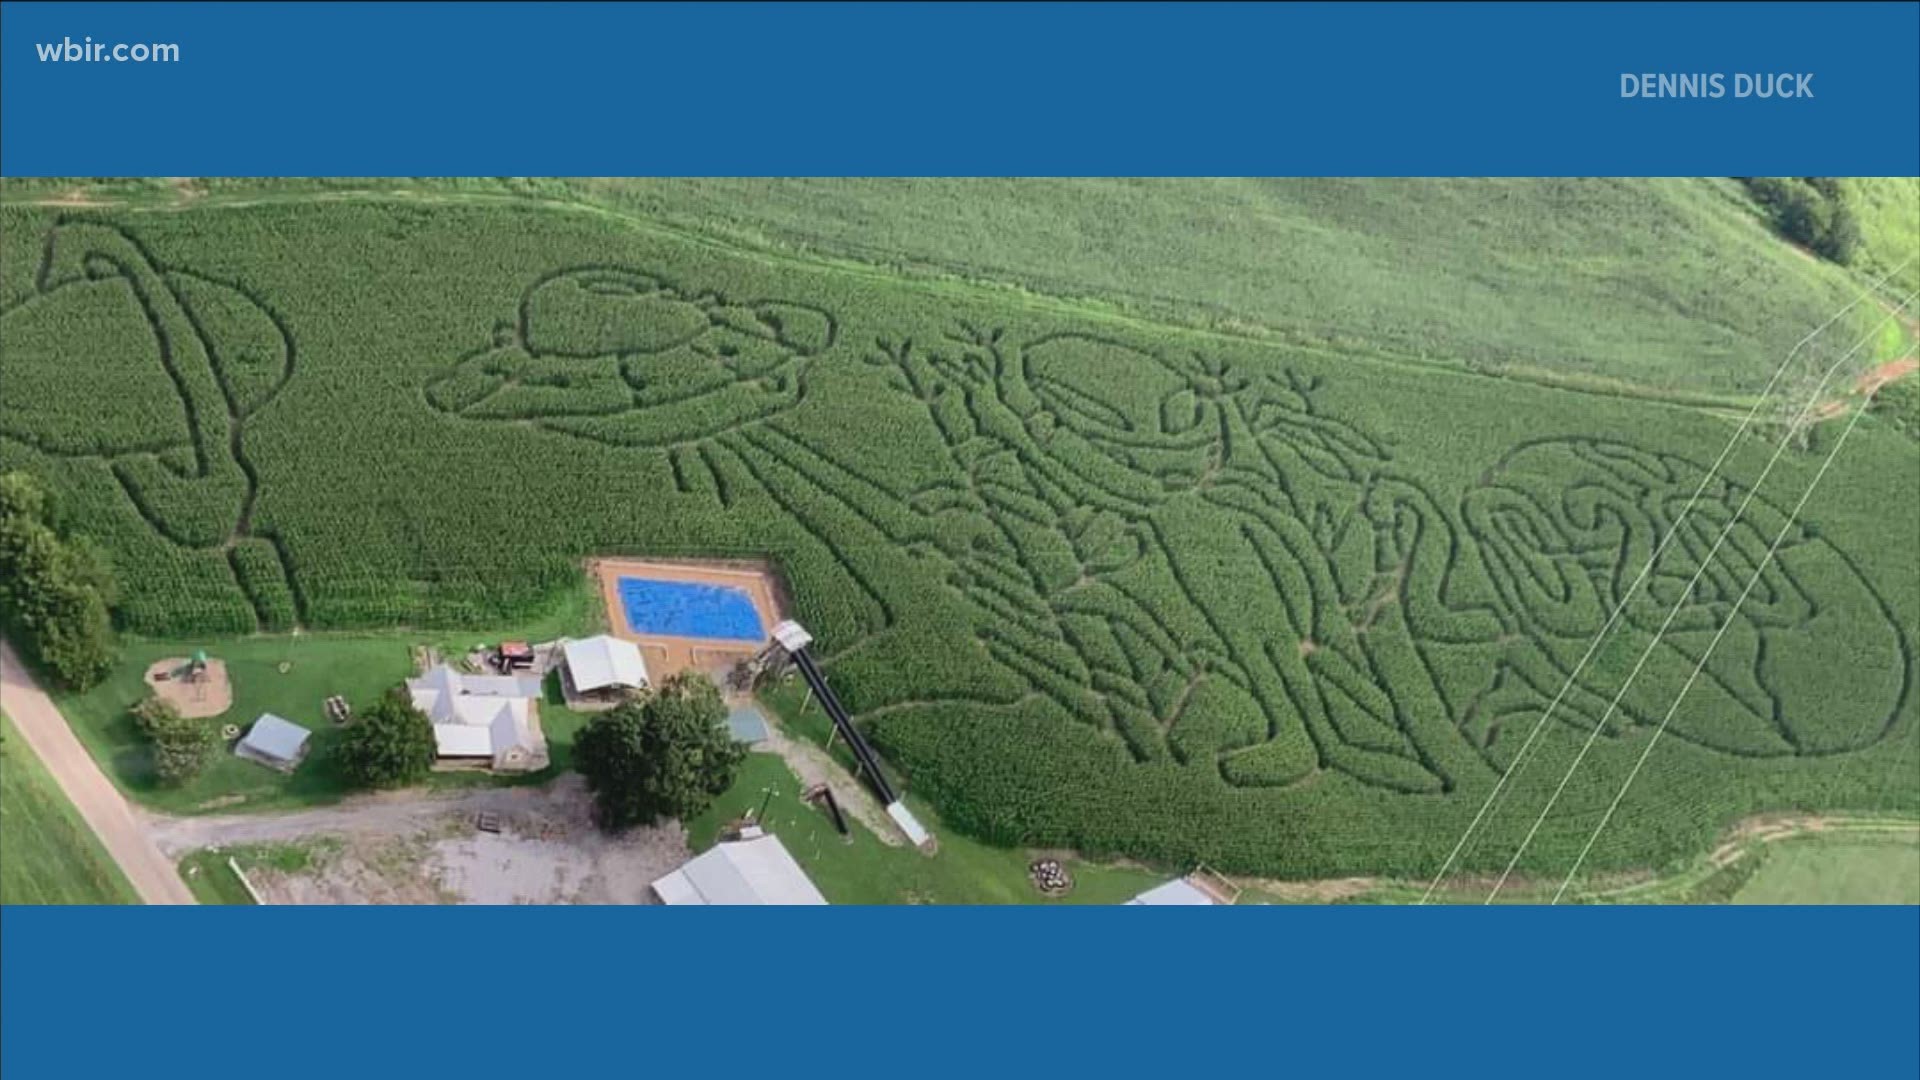 Ballinger Farm in Jefferson County shared a preview of its crazy maze on Facebook.